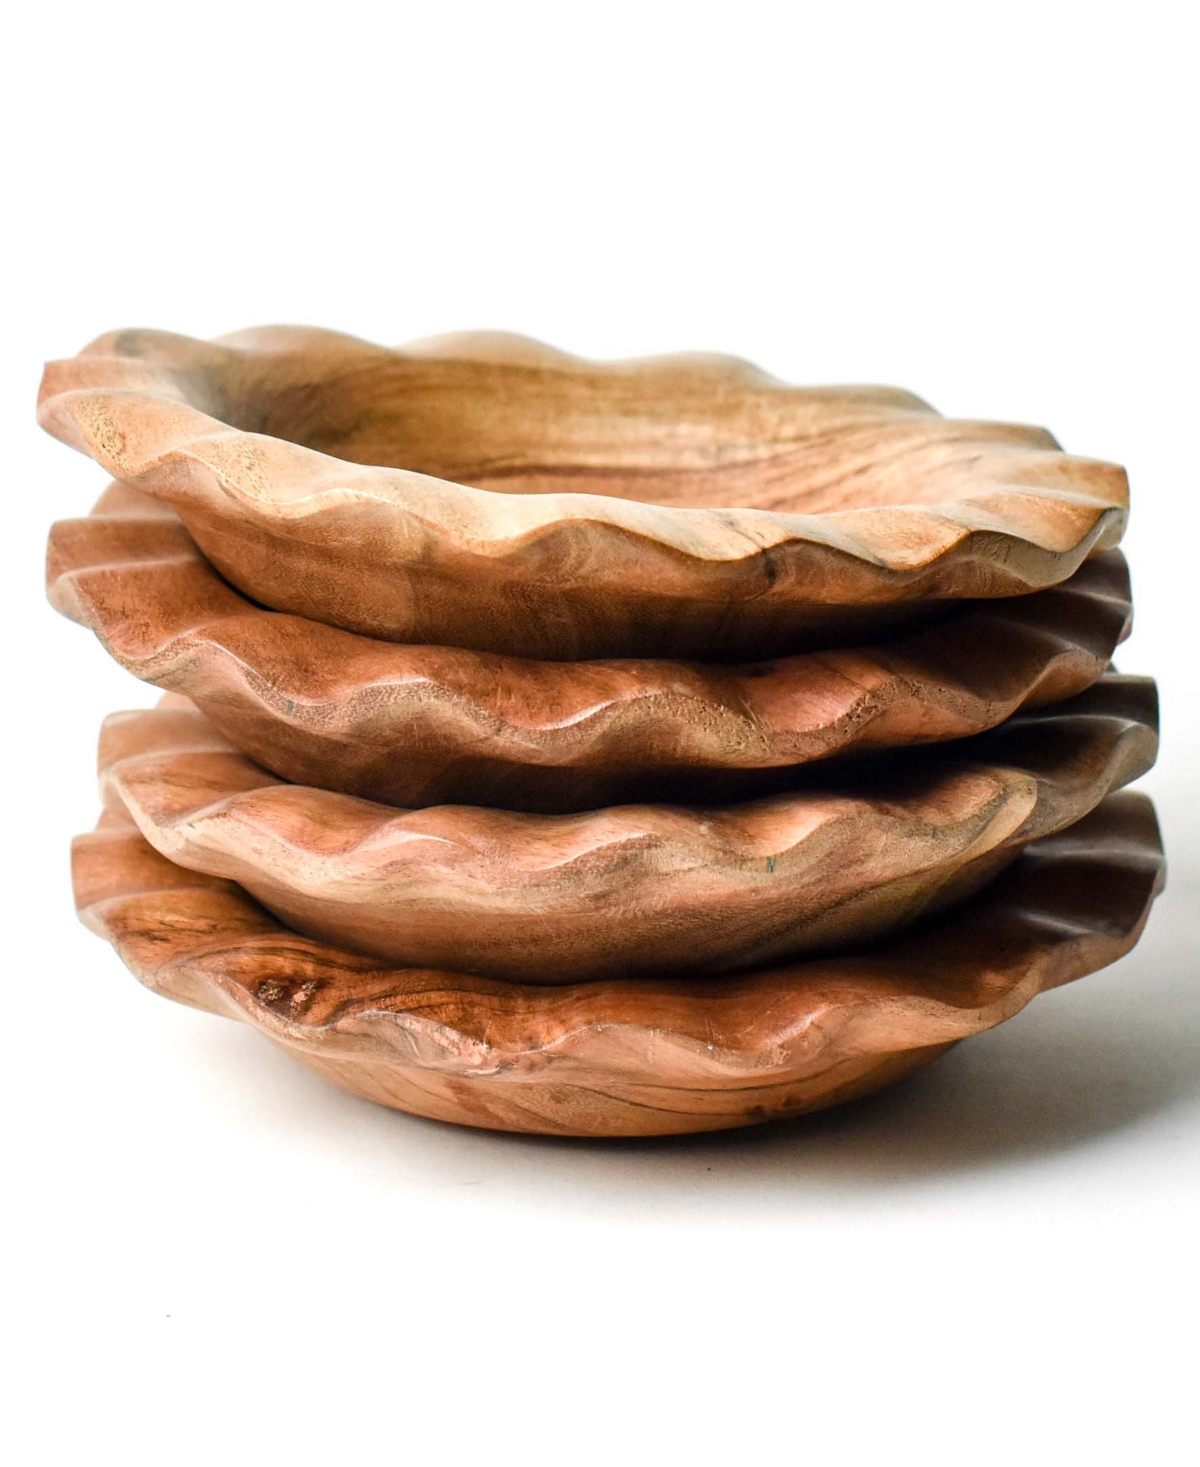 Fundamental Wood Ruffle Small Bowl Set of 4, Service for 4 - Brown